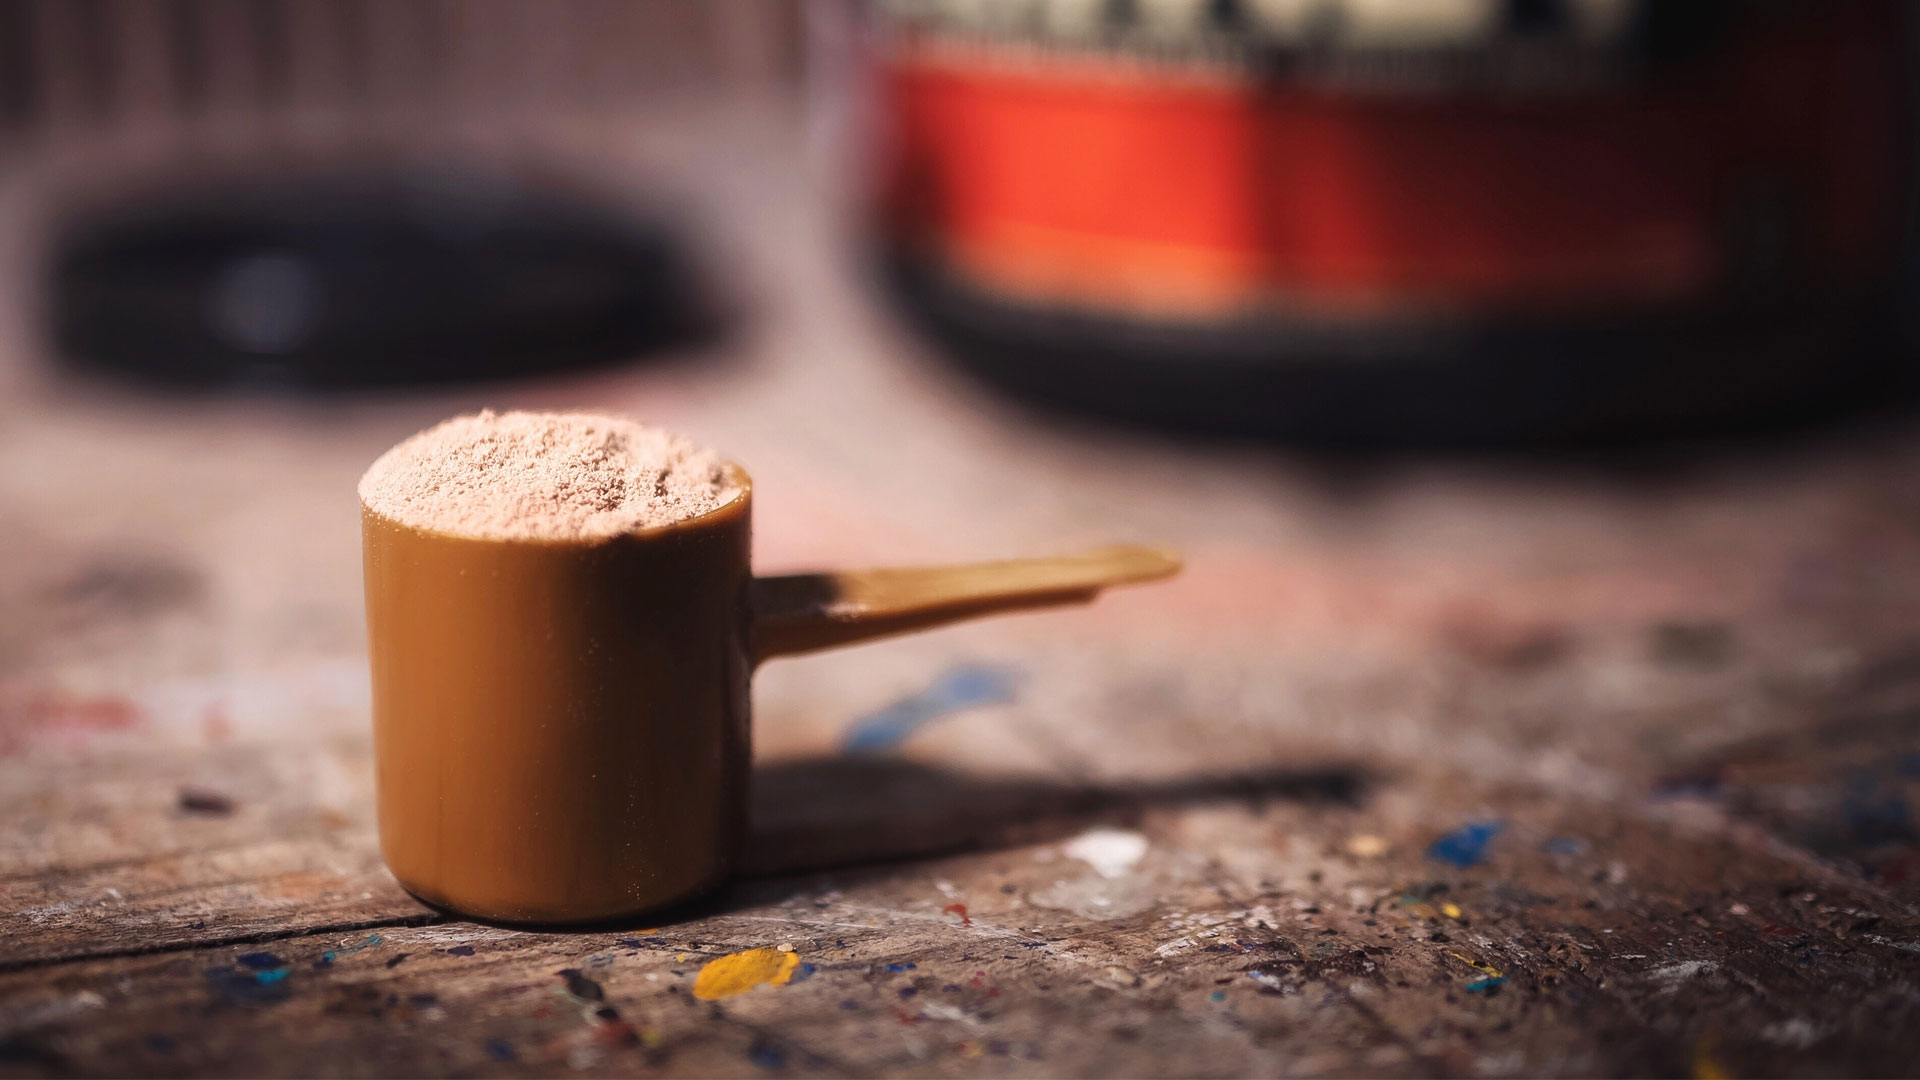 Does Protein Powder Expire? Understanding Shelf Life and Storage Guidelines